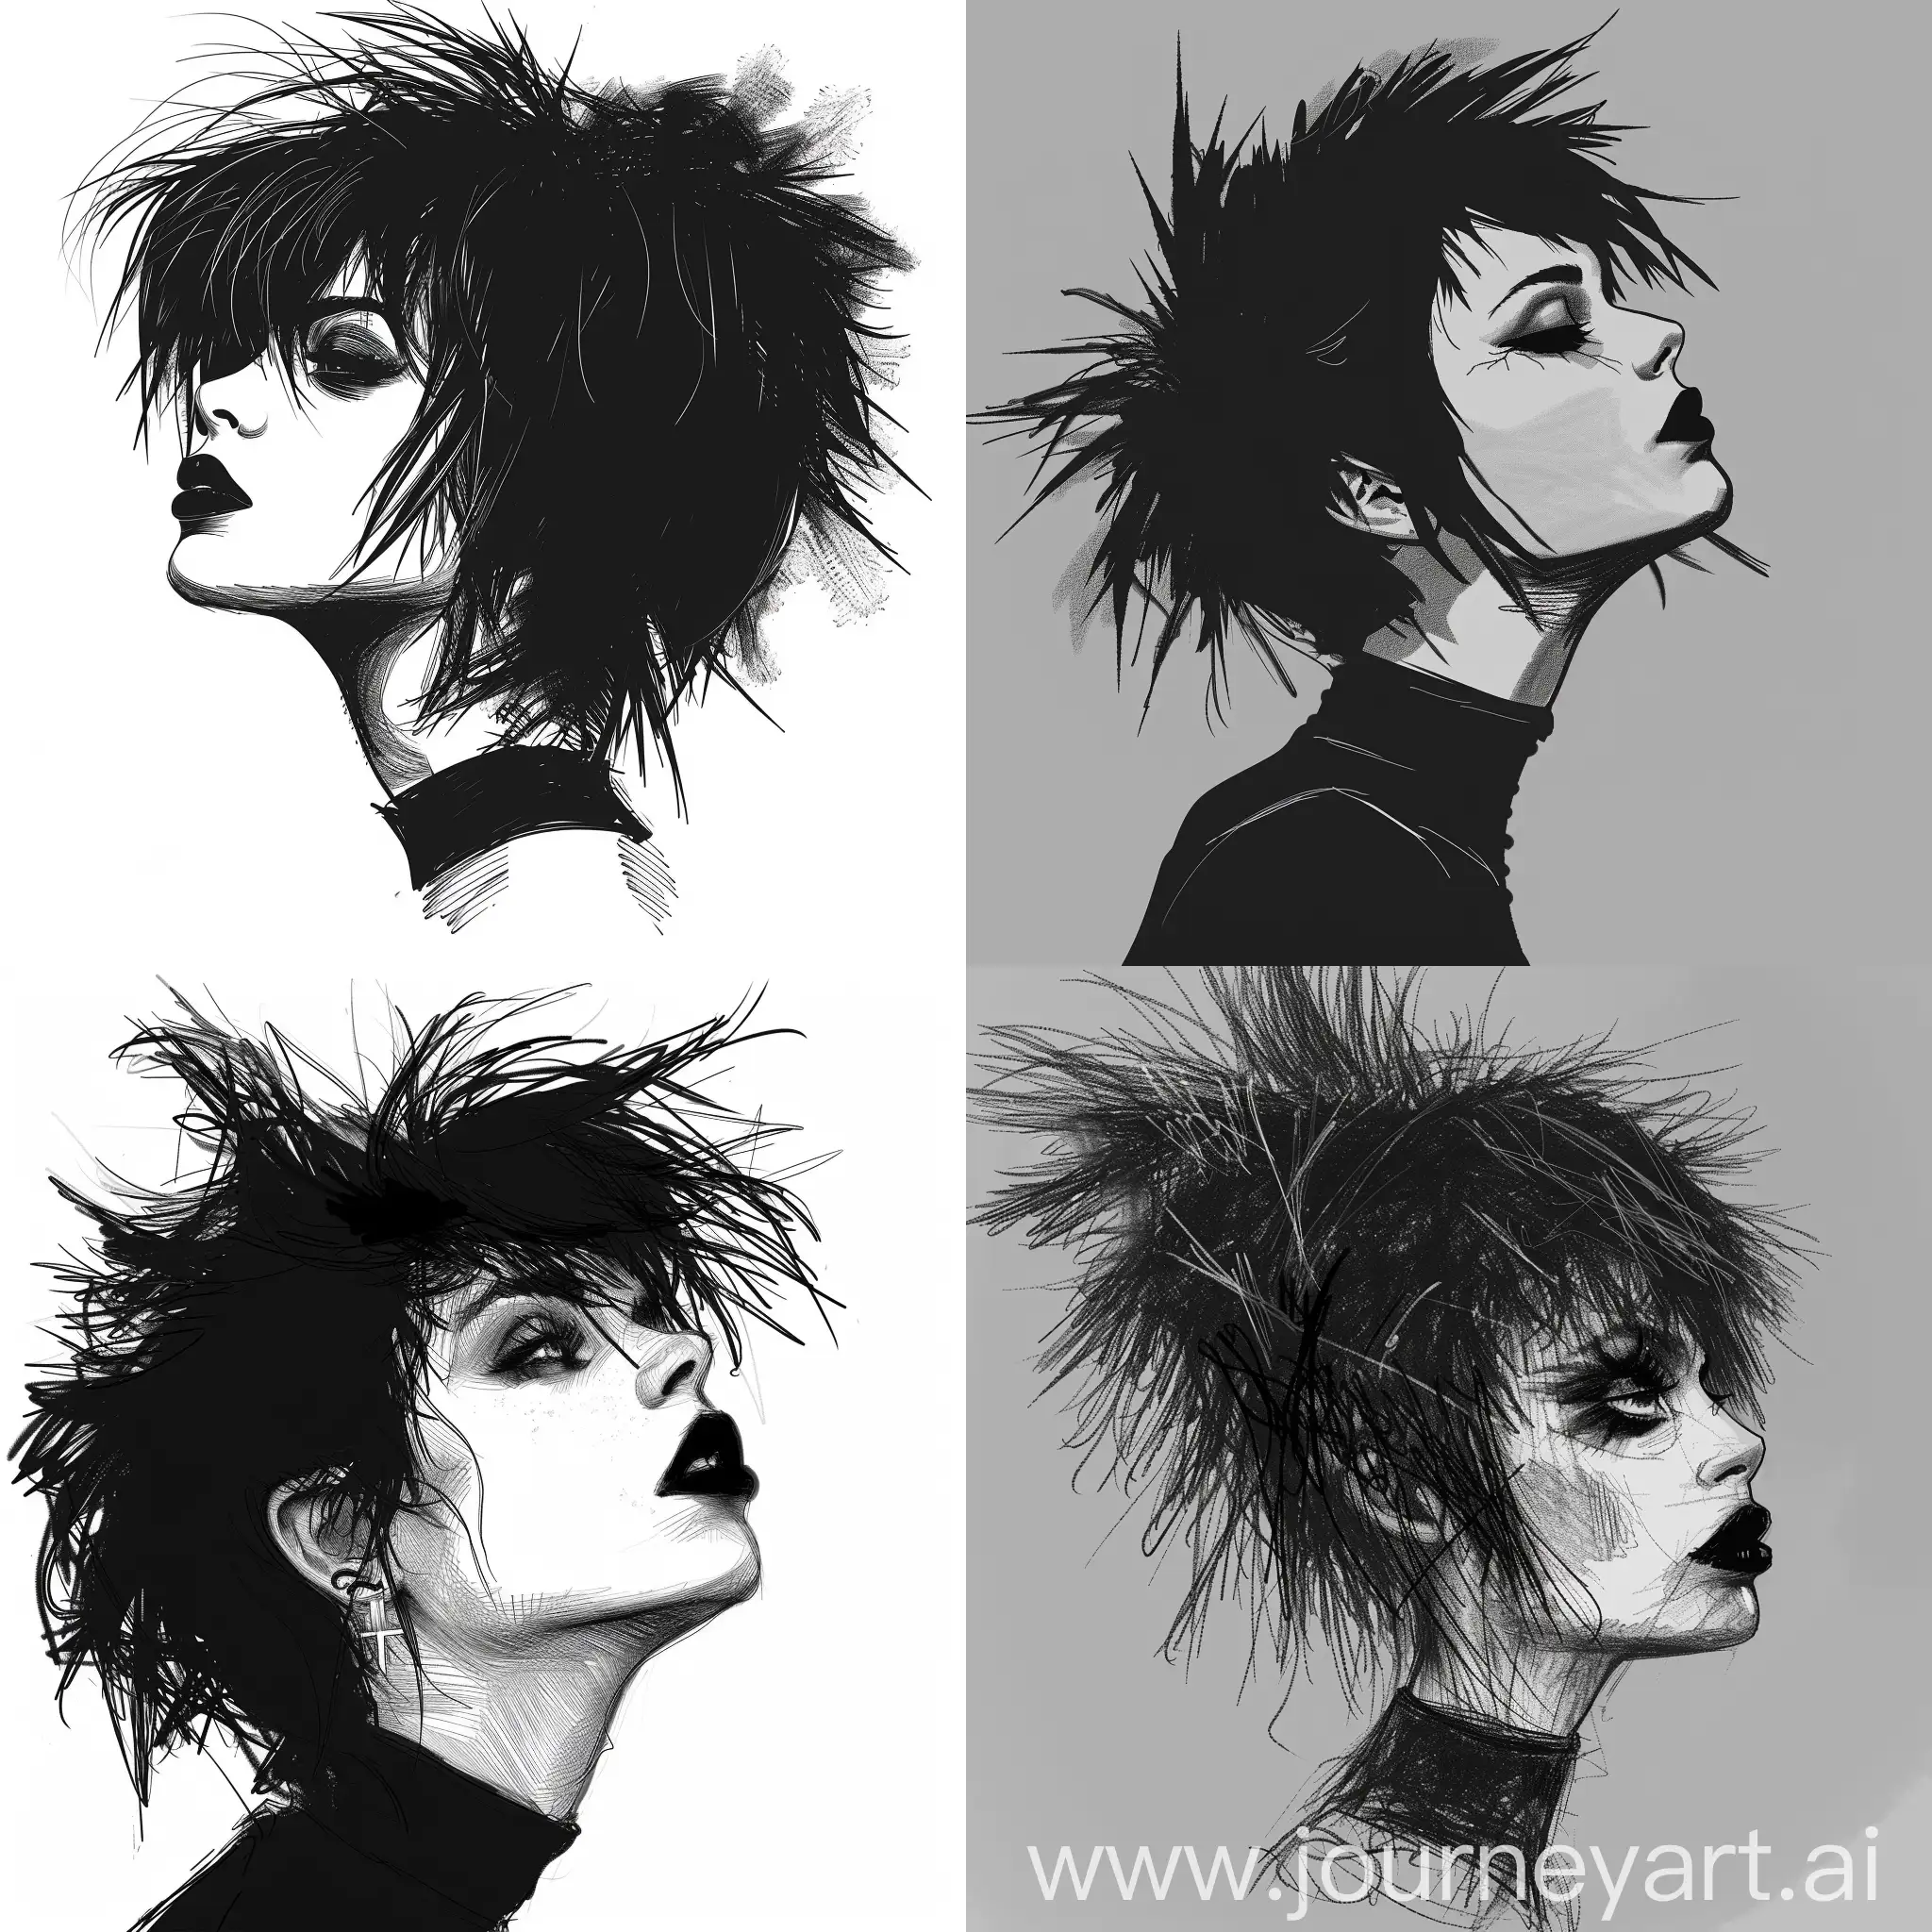 Goth-Woman-Profile-Portrait-with-Shaggy-Hair-and-Black-Lipstick